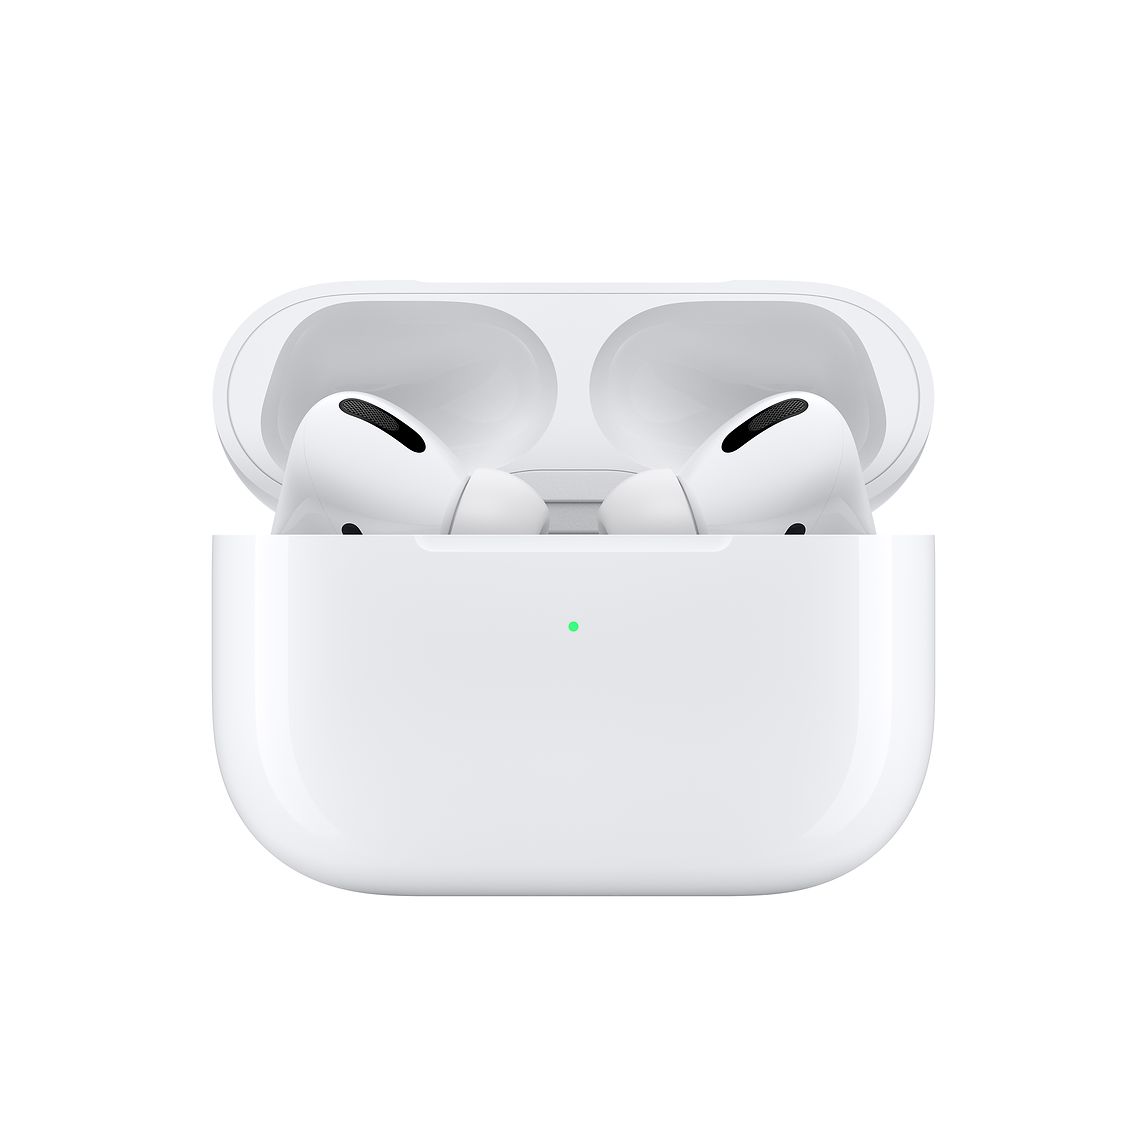 AirPods Pro selling on Amazon for record-low price - www.semashow.com News